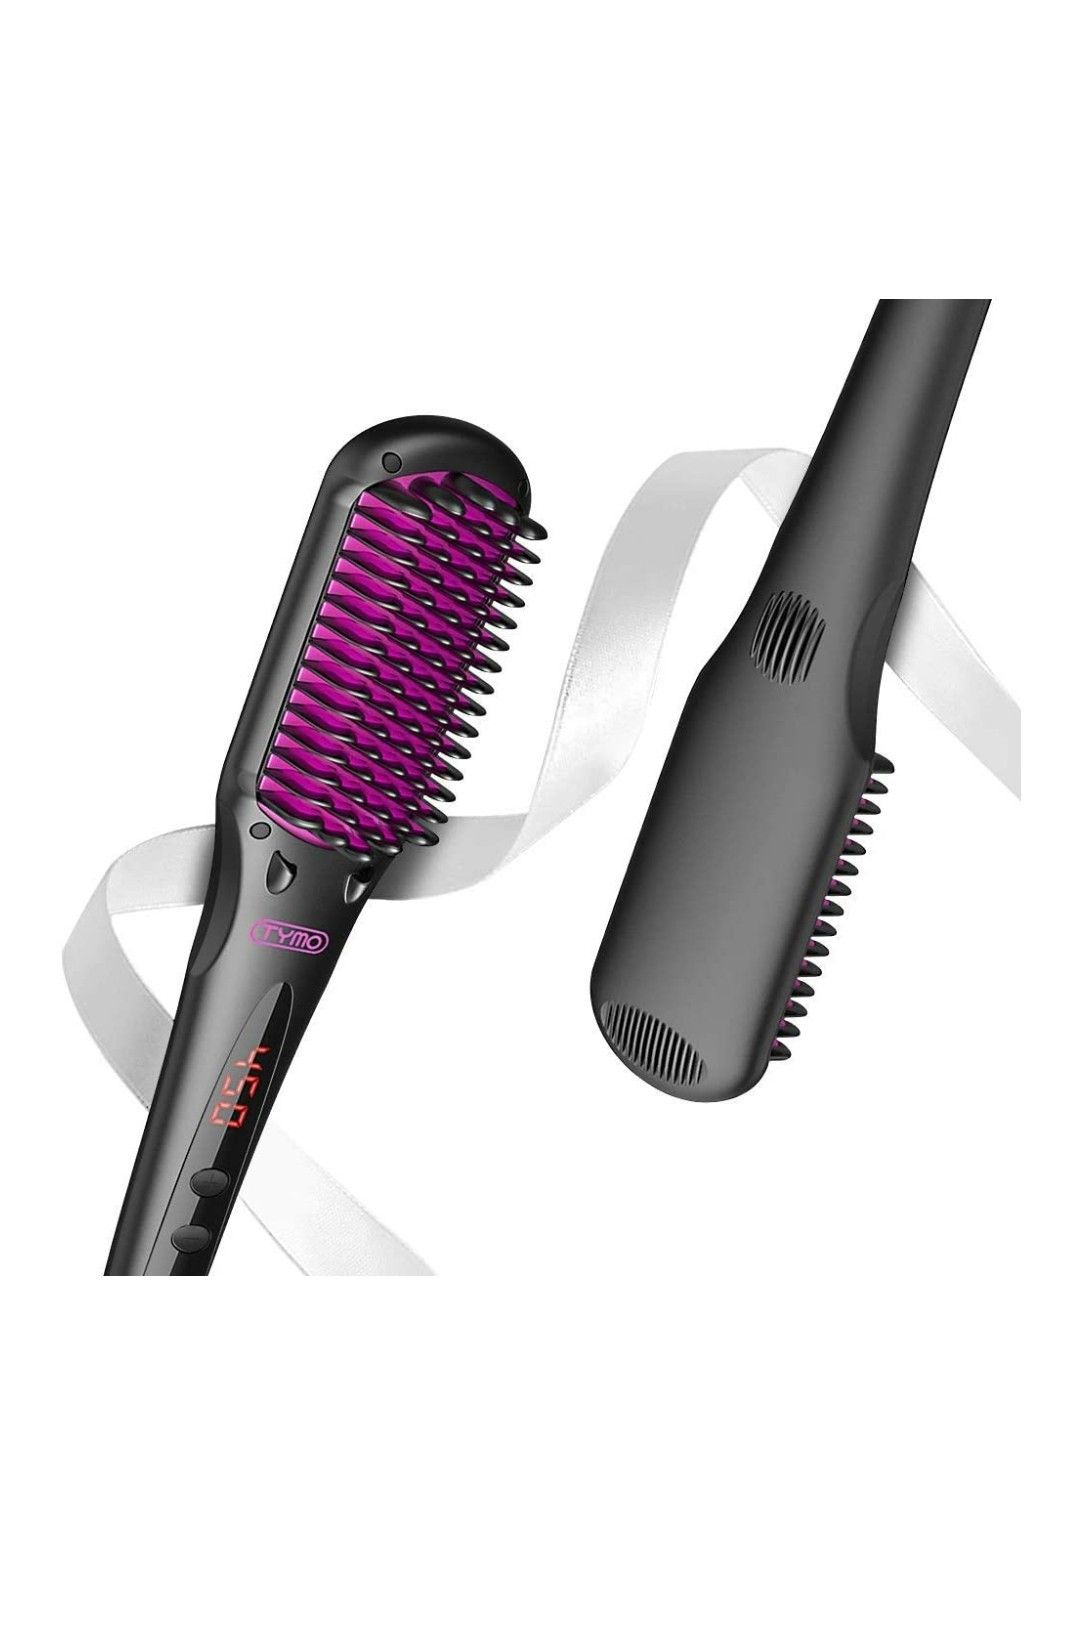 (W1) TYMO Hair Straightener Brush - Enhanced Ionic Straightening Brush with 16 Heat Levels for Frizz-Free Silky Hair, Anti-Scald & Auto-Off Safe